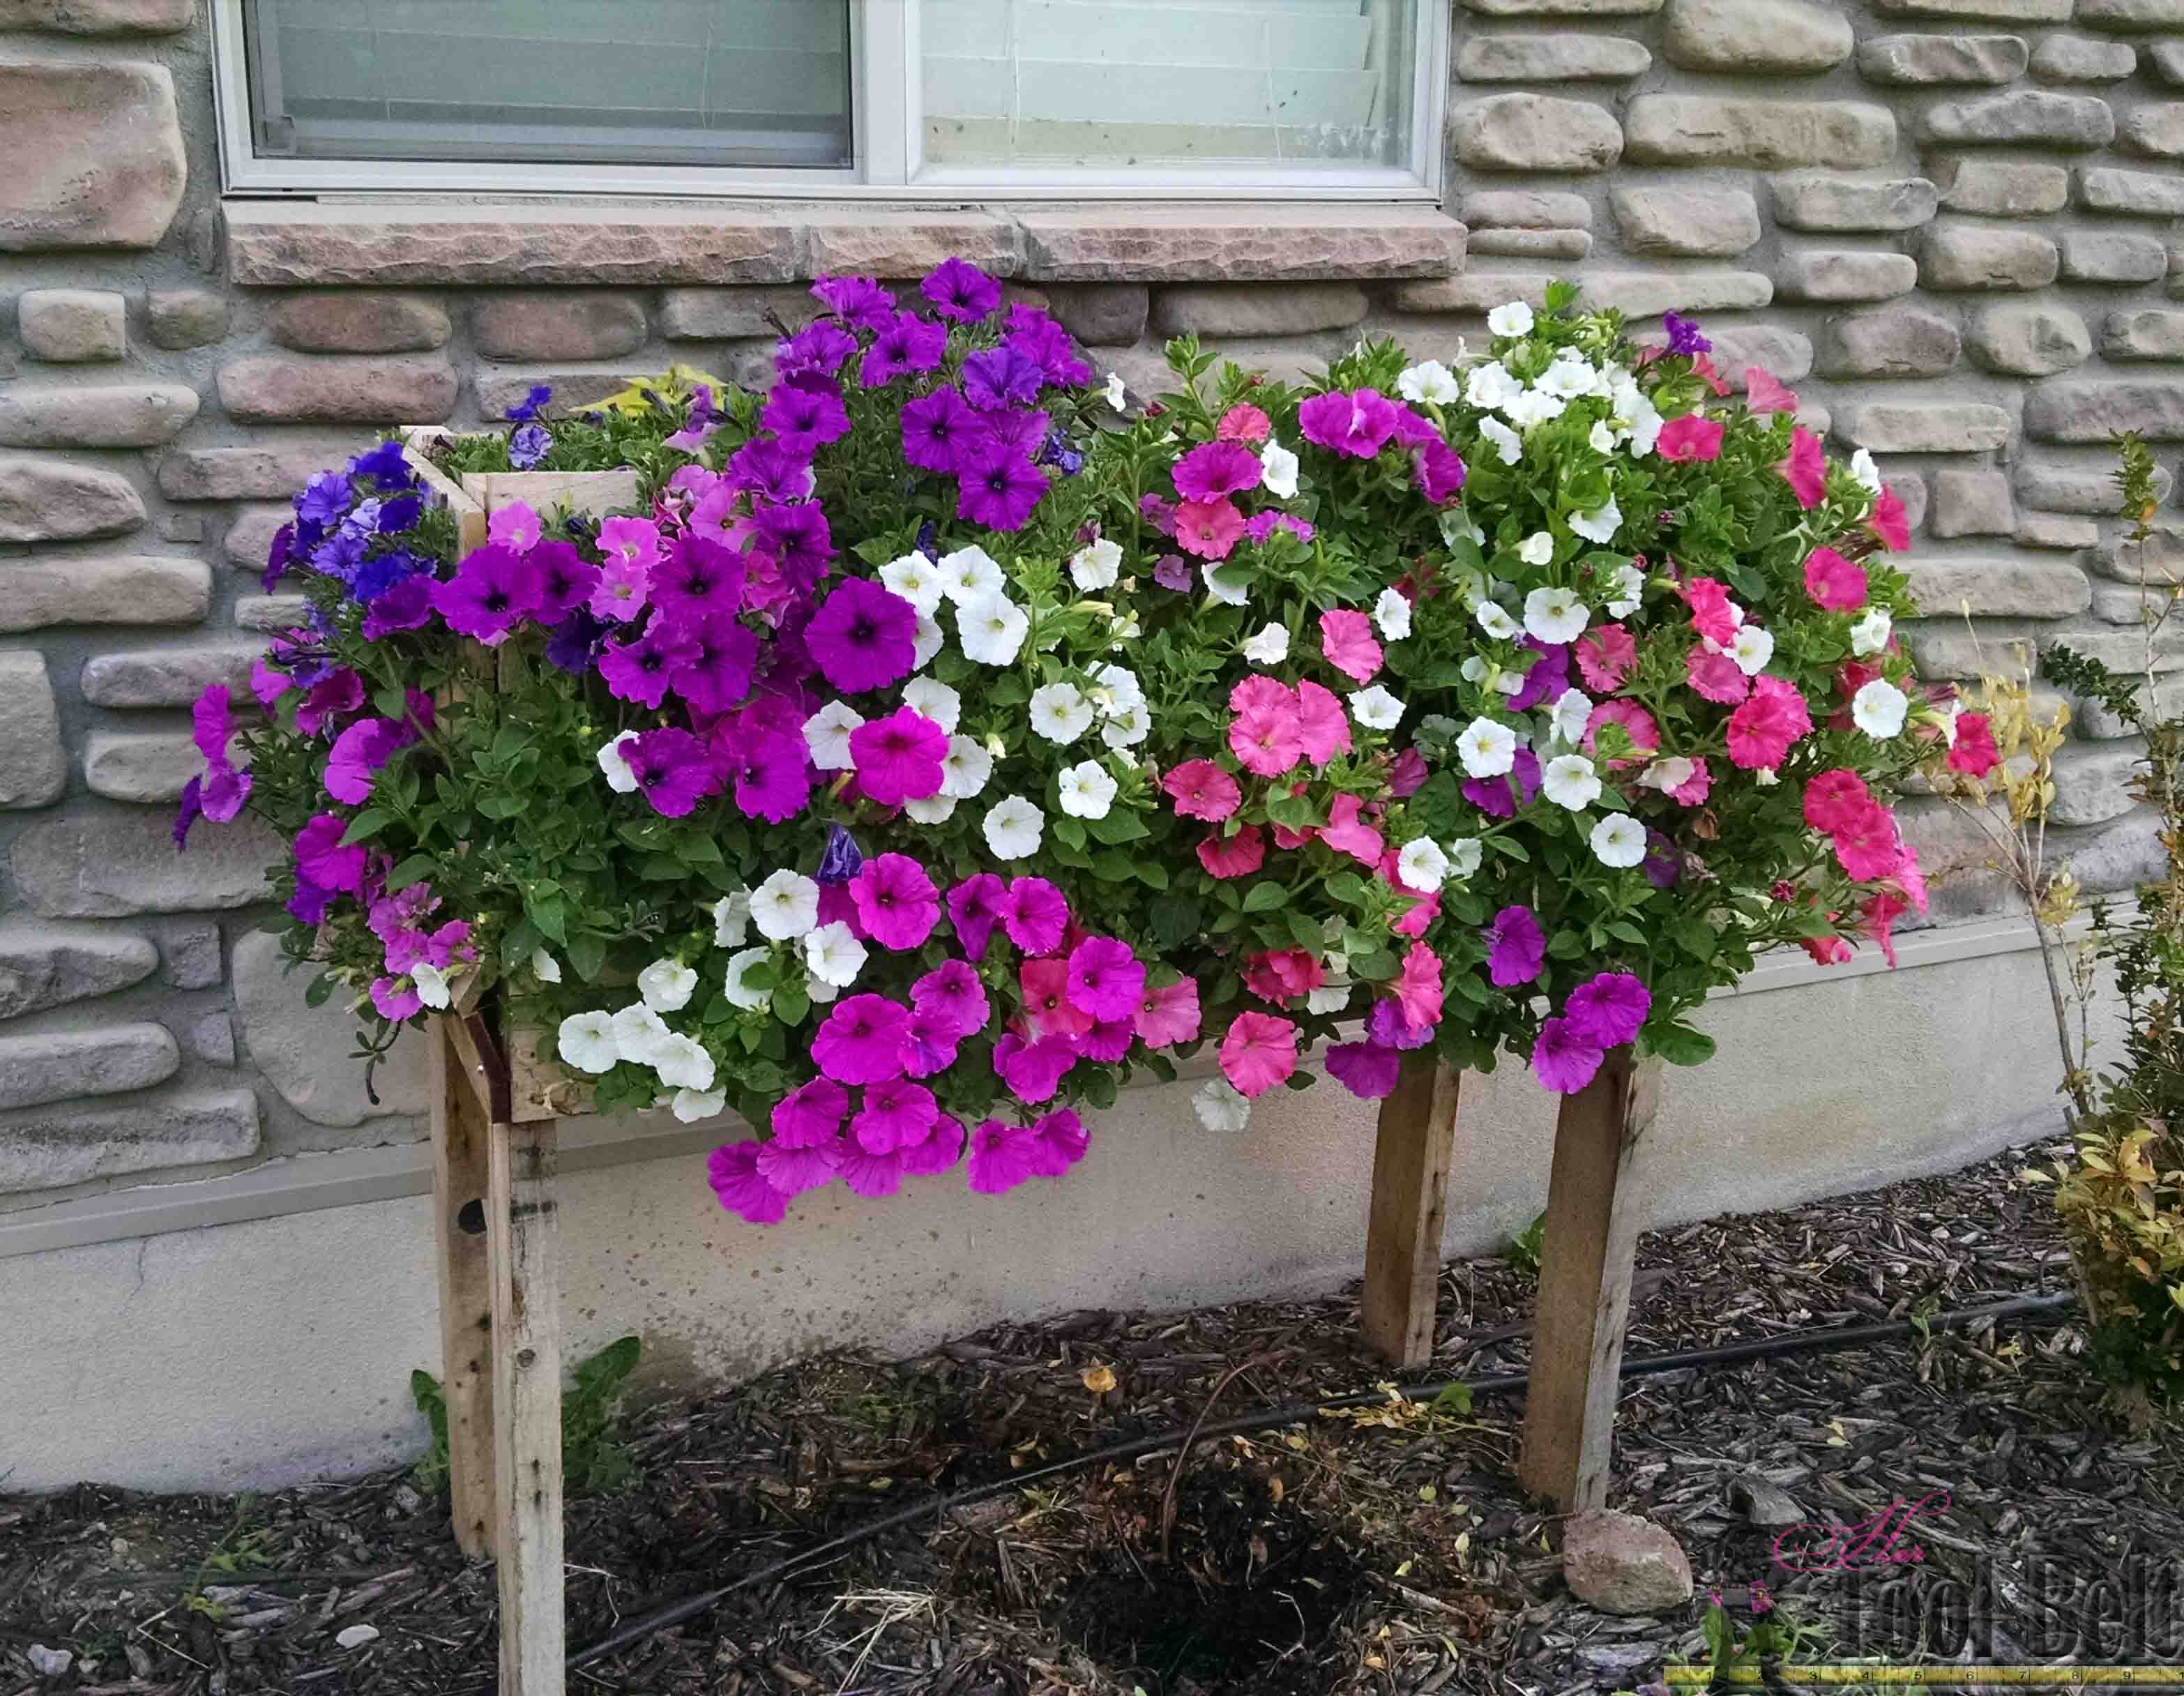 Make a Cascading Flower Planter Box from Pallets